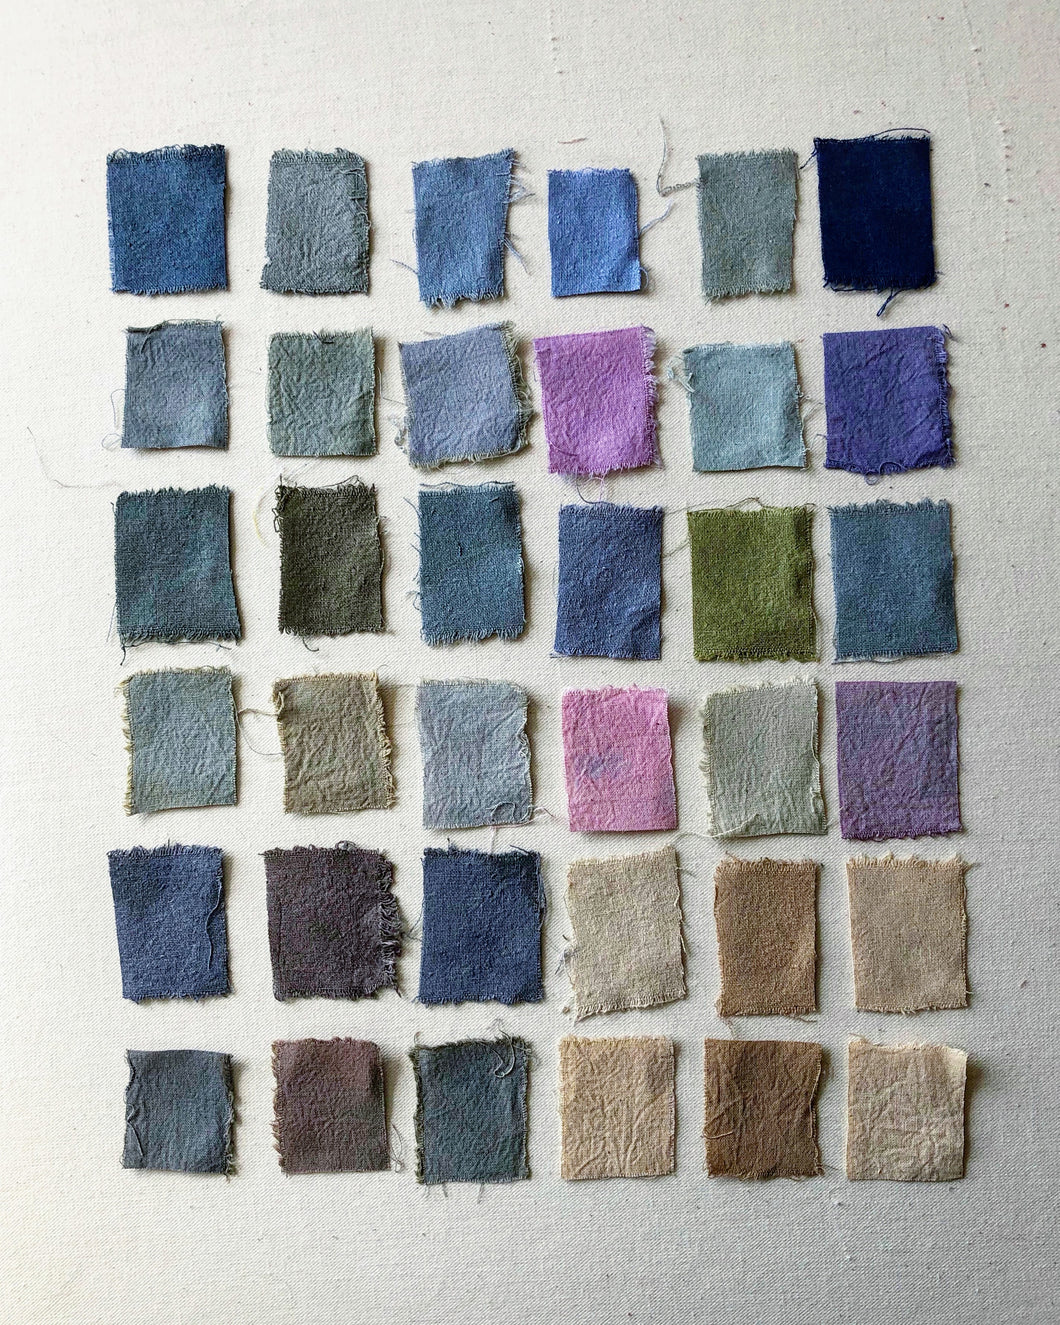 winter blues & painting with pH - natural dyes virtual workshop - feb 27 & 28 2021